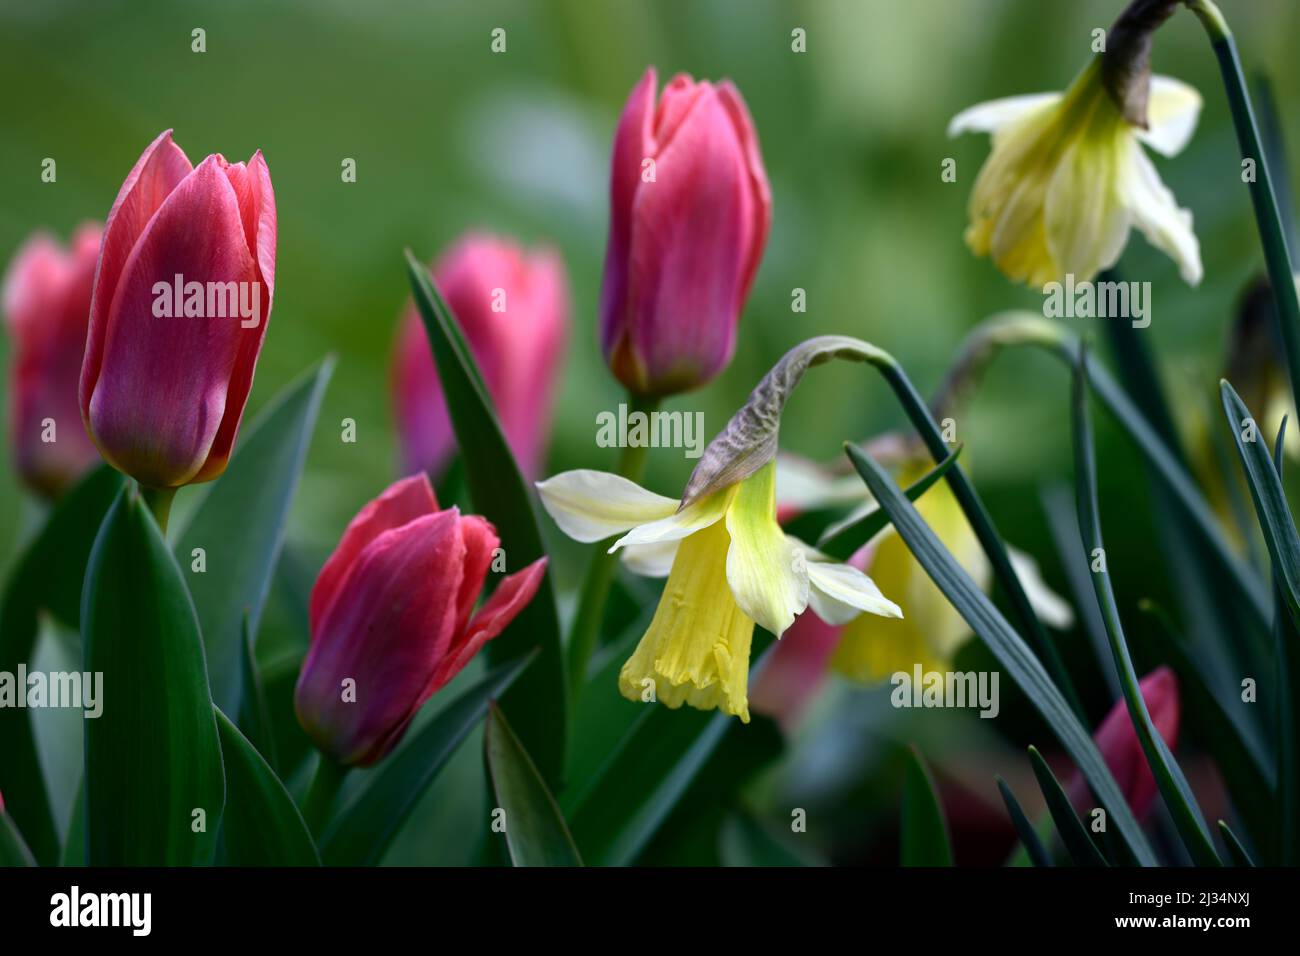 narcissus w p milner, narcissus wp milner,Miniature Narcissus,Miniature Narcissi,Pale yellow changing to creamy white flowers,pale yellow flower,Tulip Stock Photo